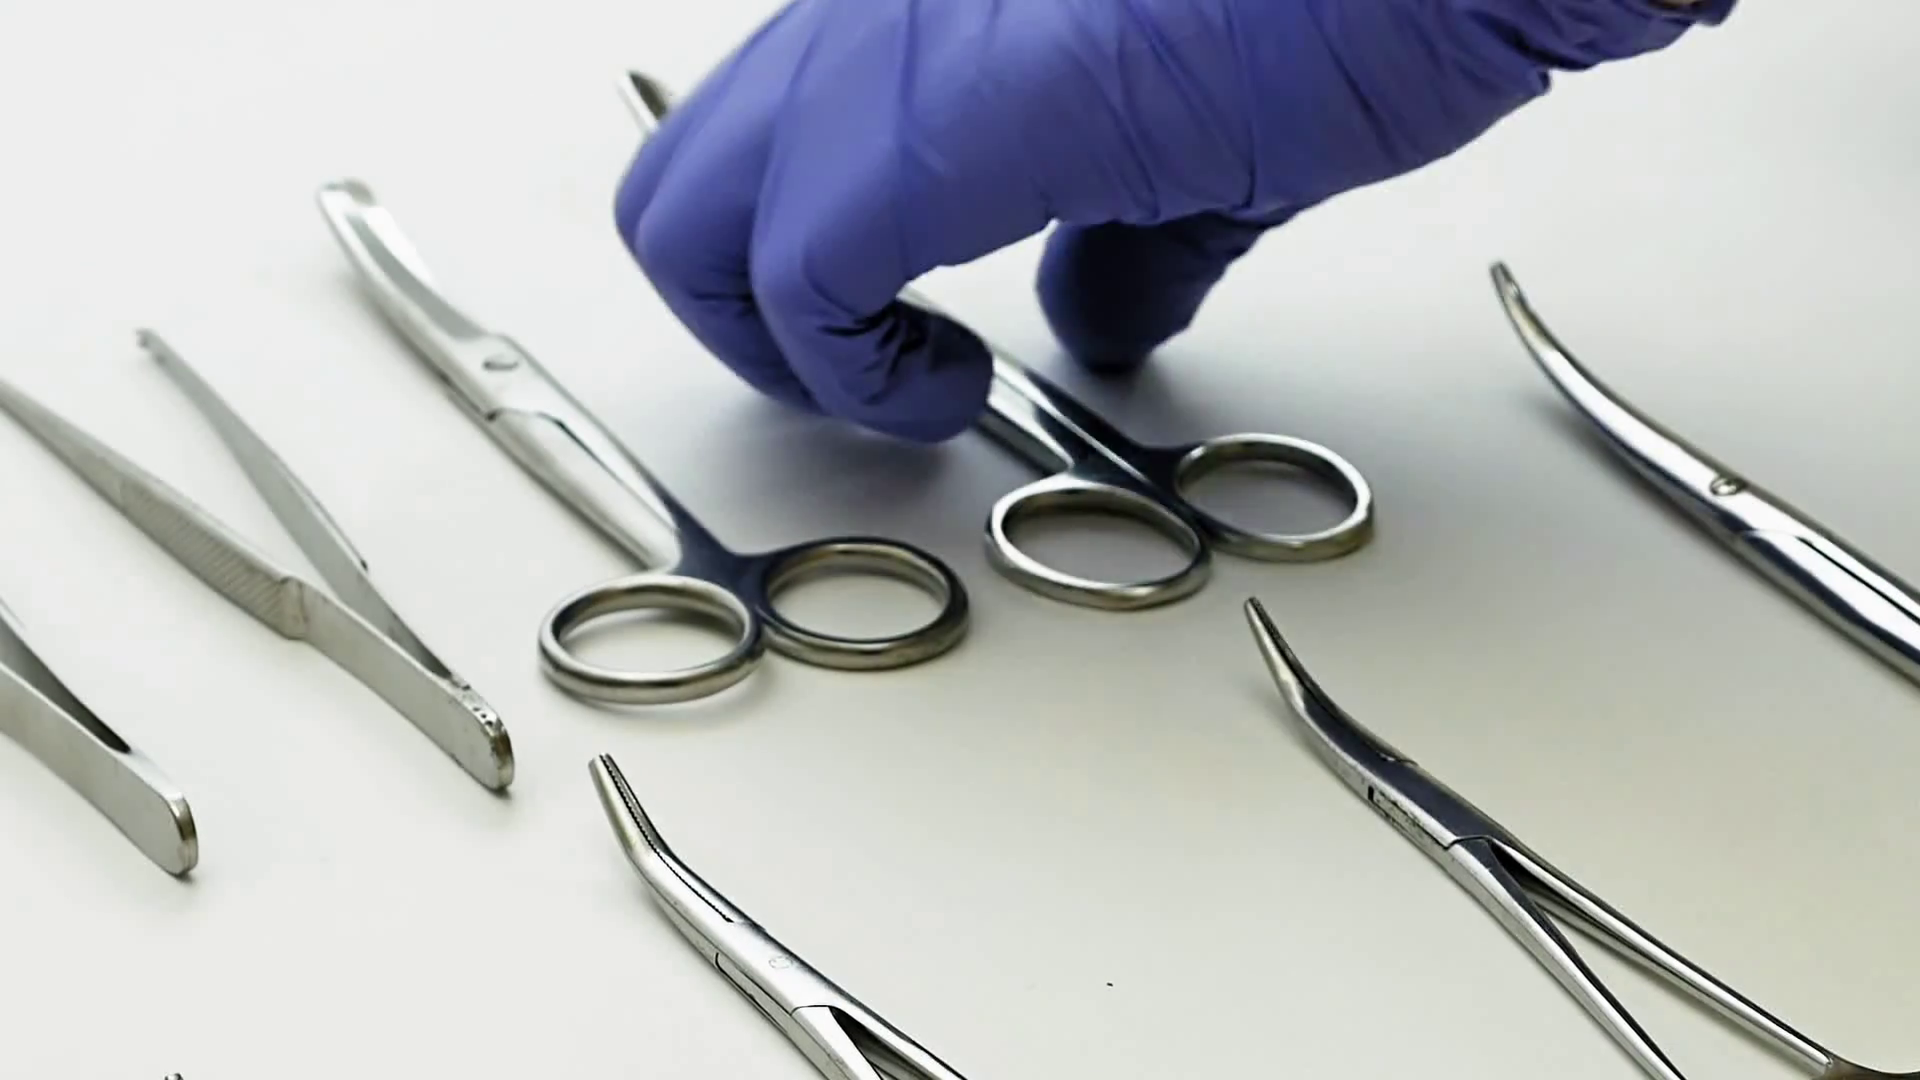 surgical-nurse-in-protective-gloves-picks-medical-tools-up-in-surgery-room_b4anfelfl_thumbnail-full01.png